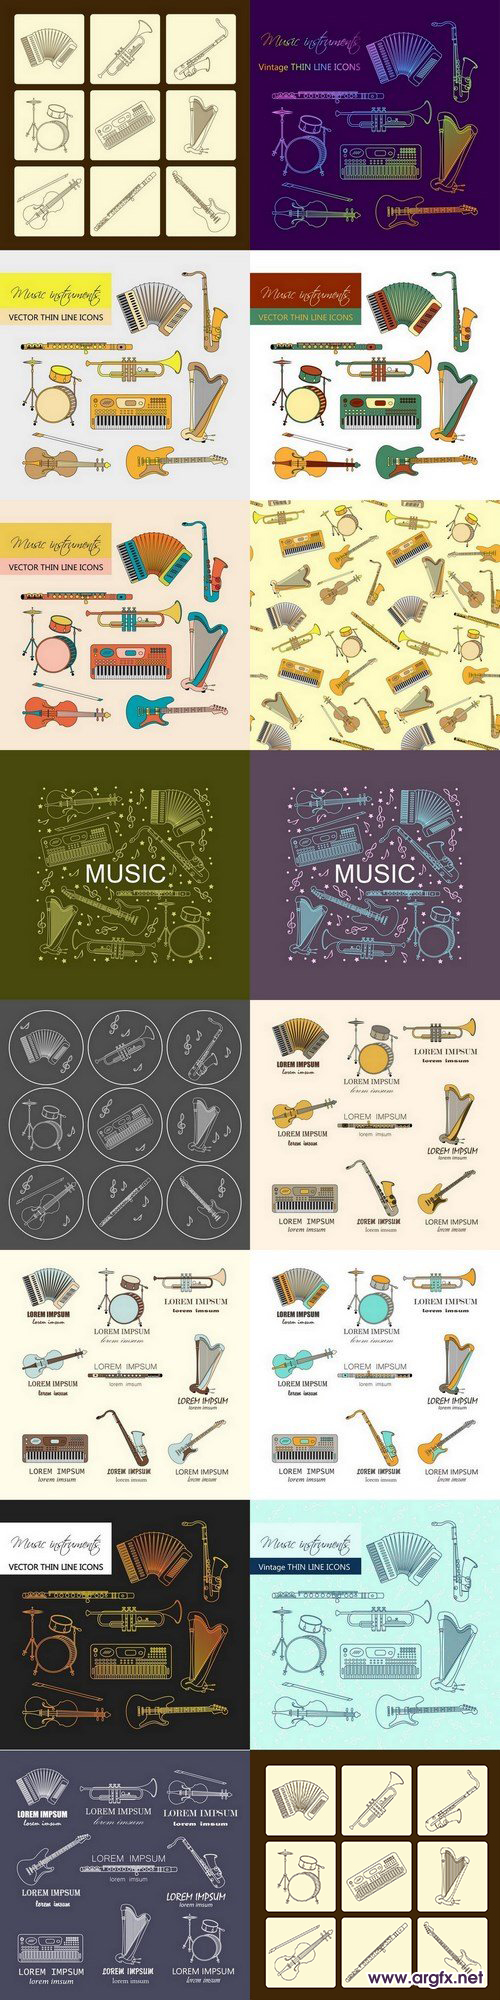 music instruments - 15 EPS Vector Stock